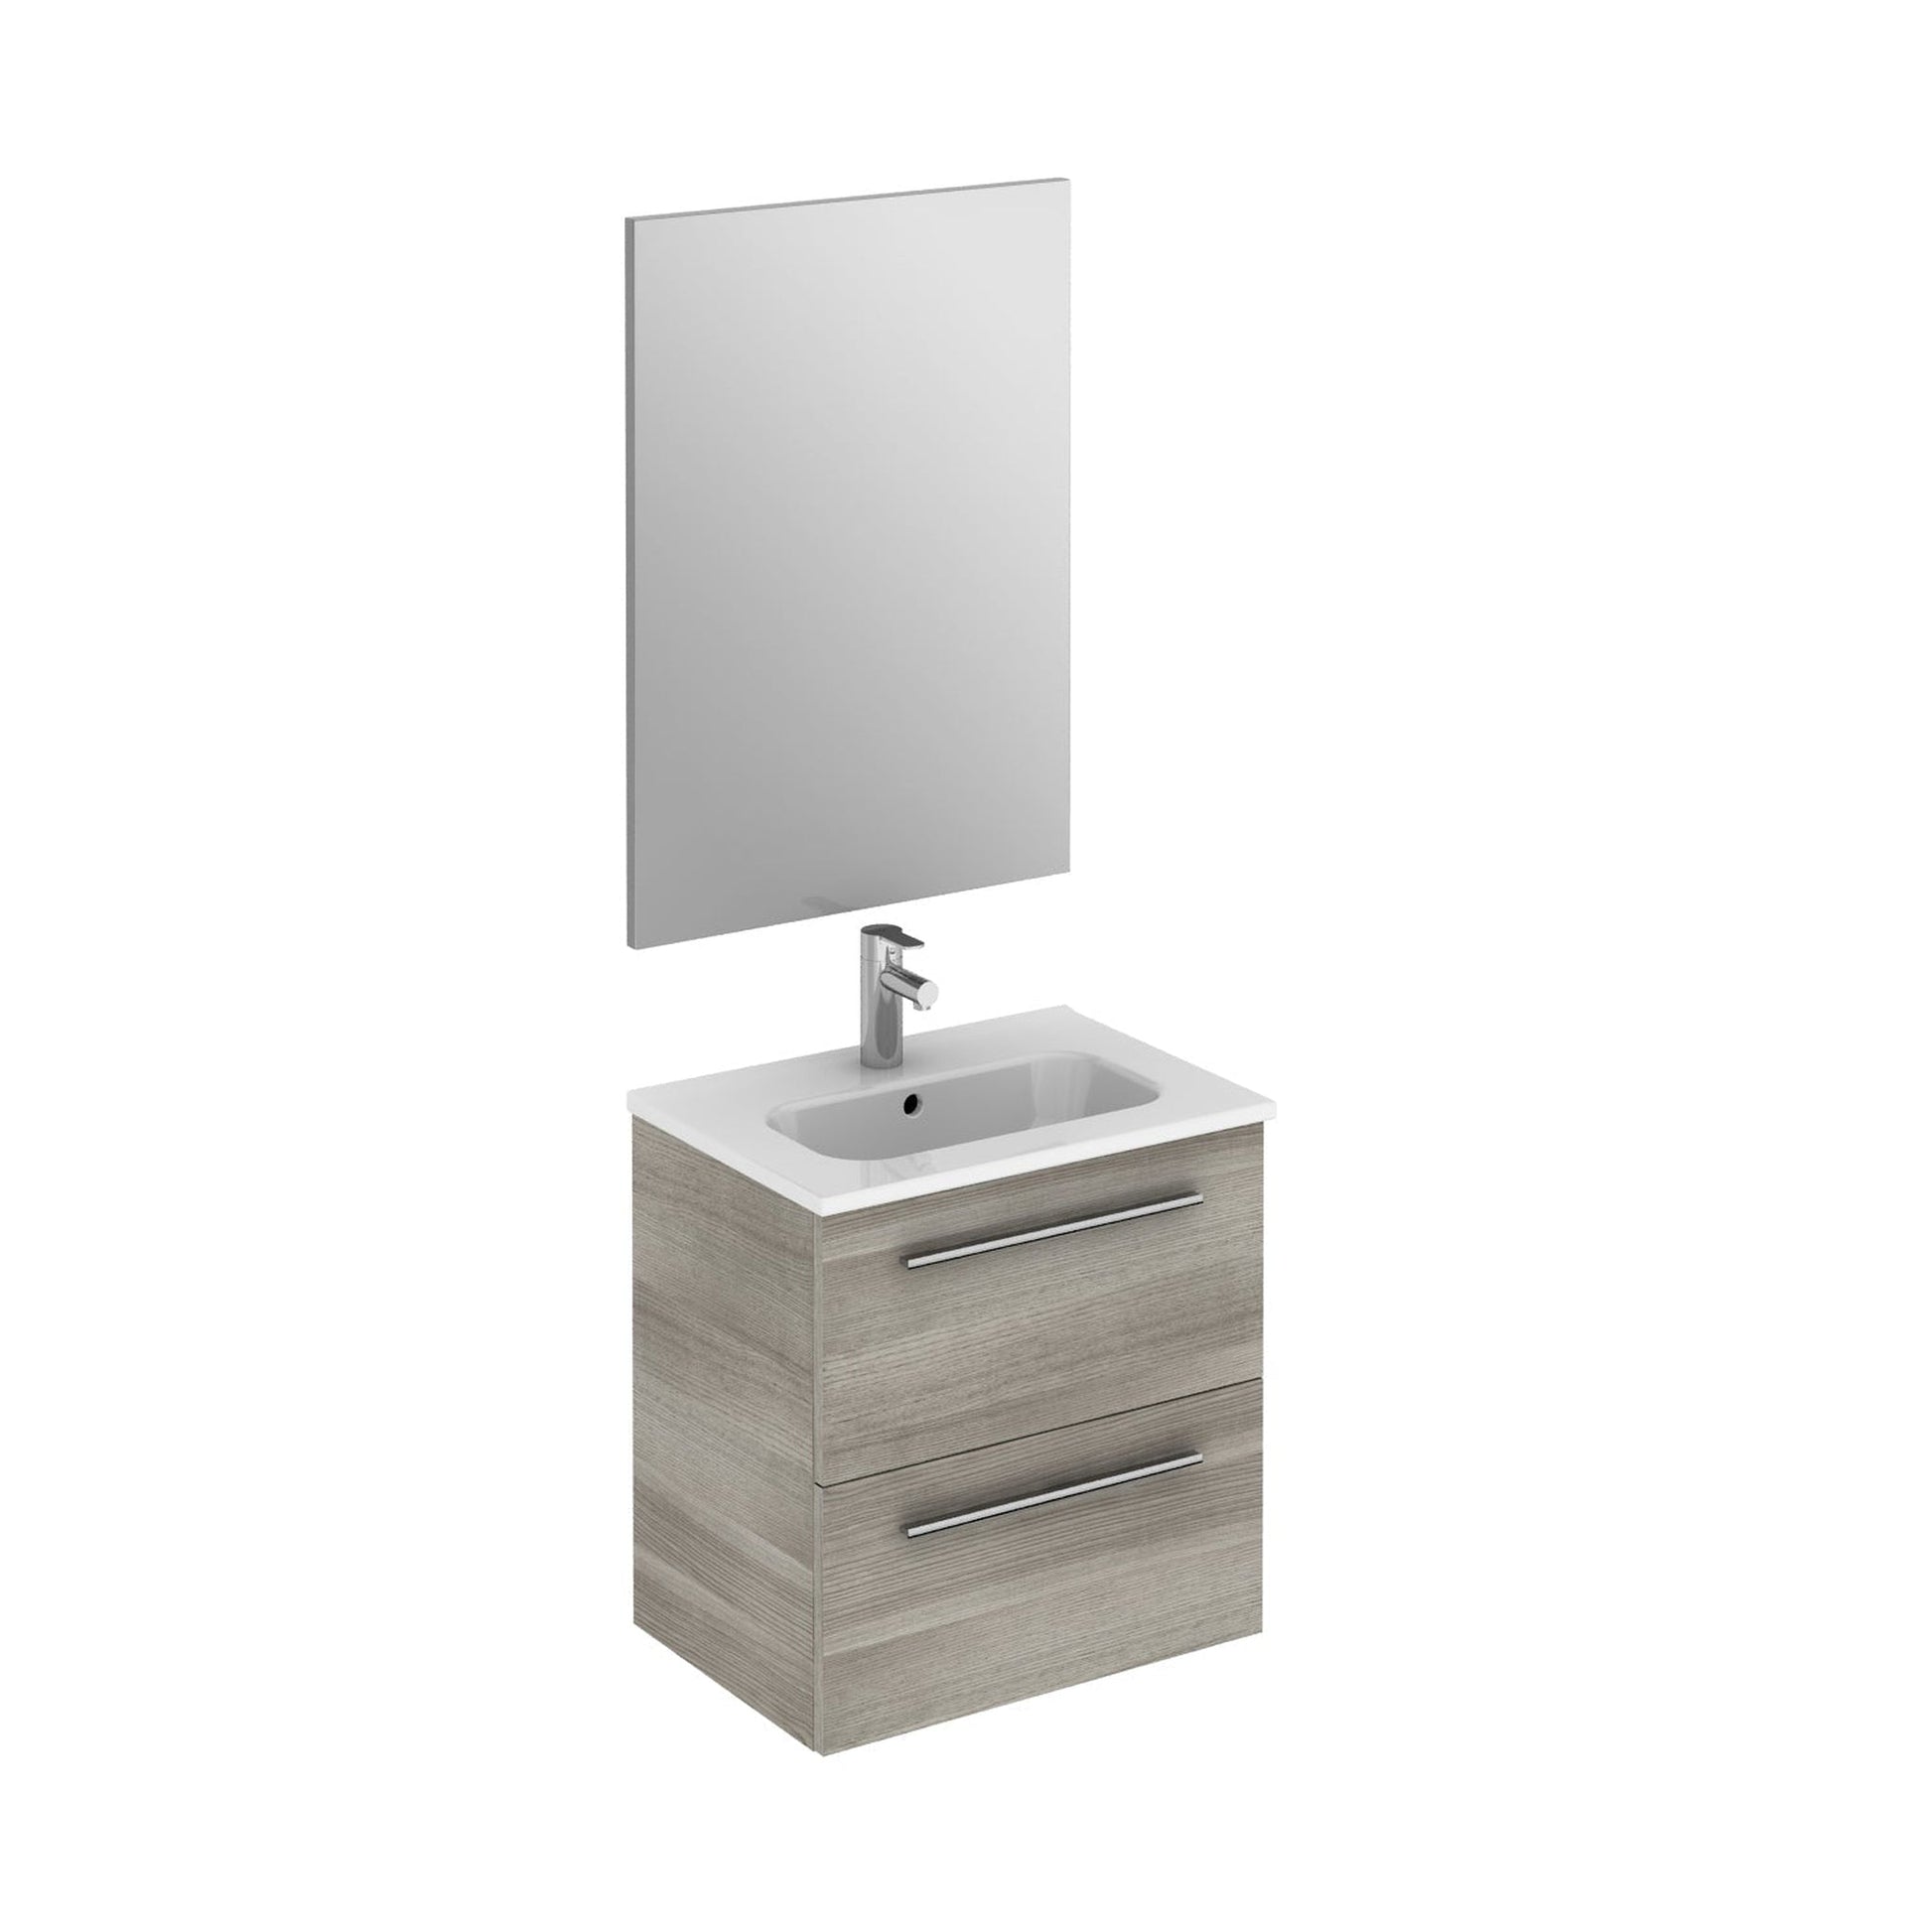 Royo Street 20" x 14" Sandy Gray Modern Wall-mounted Vanity Set With 2 Drawers Sink and Mirror